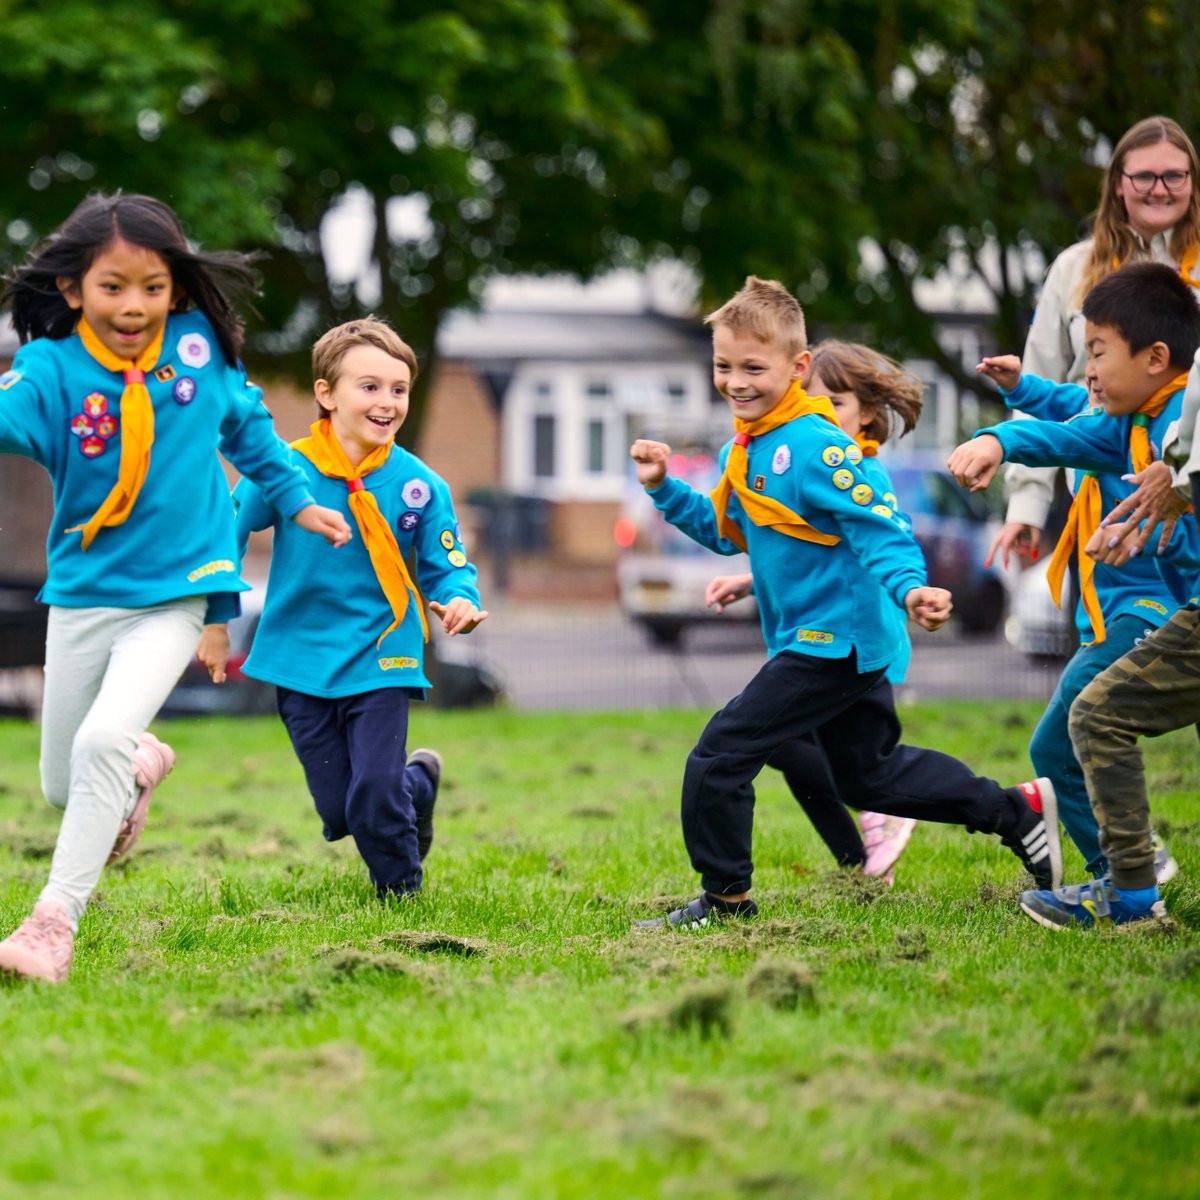 Today is #InternationalBeaverDay, let us take a moment to celebrate the amazing Beaver Scouts who inspire us with their curiosity, creativity, and teamwork💙